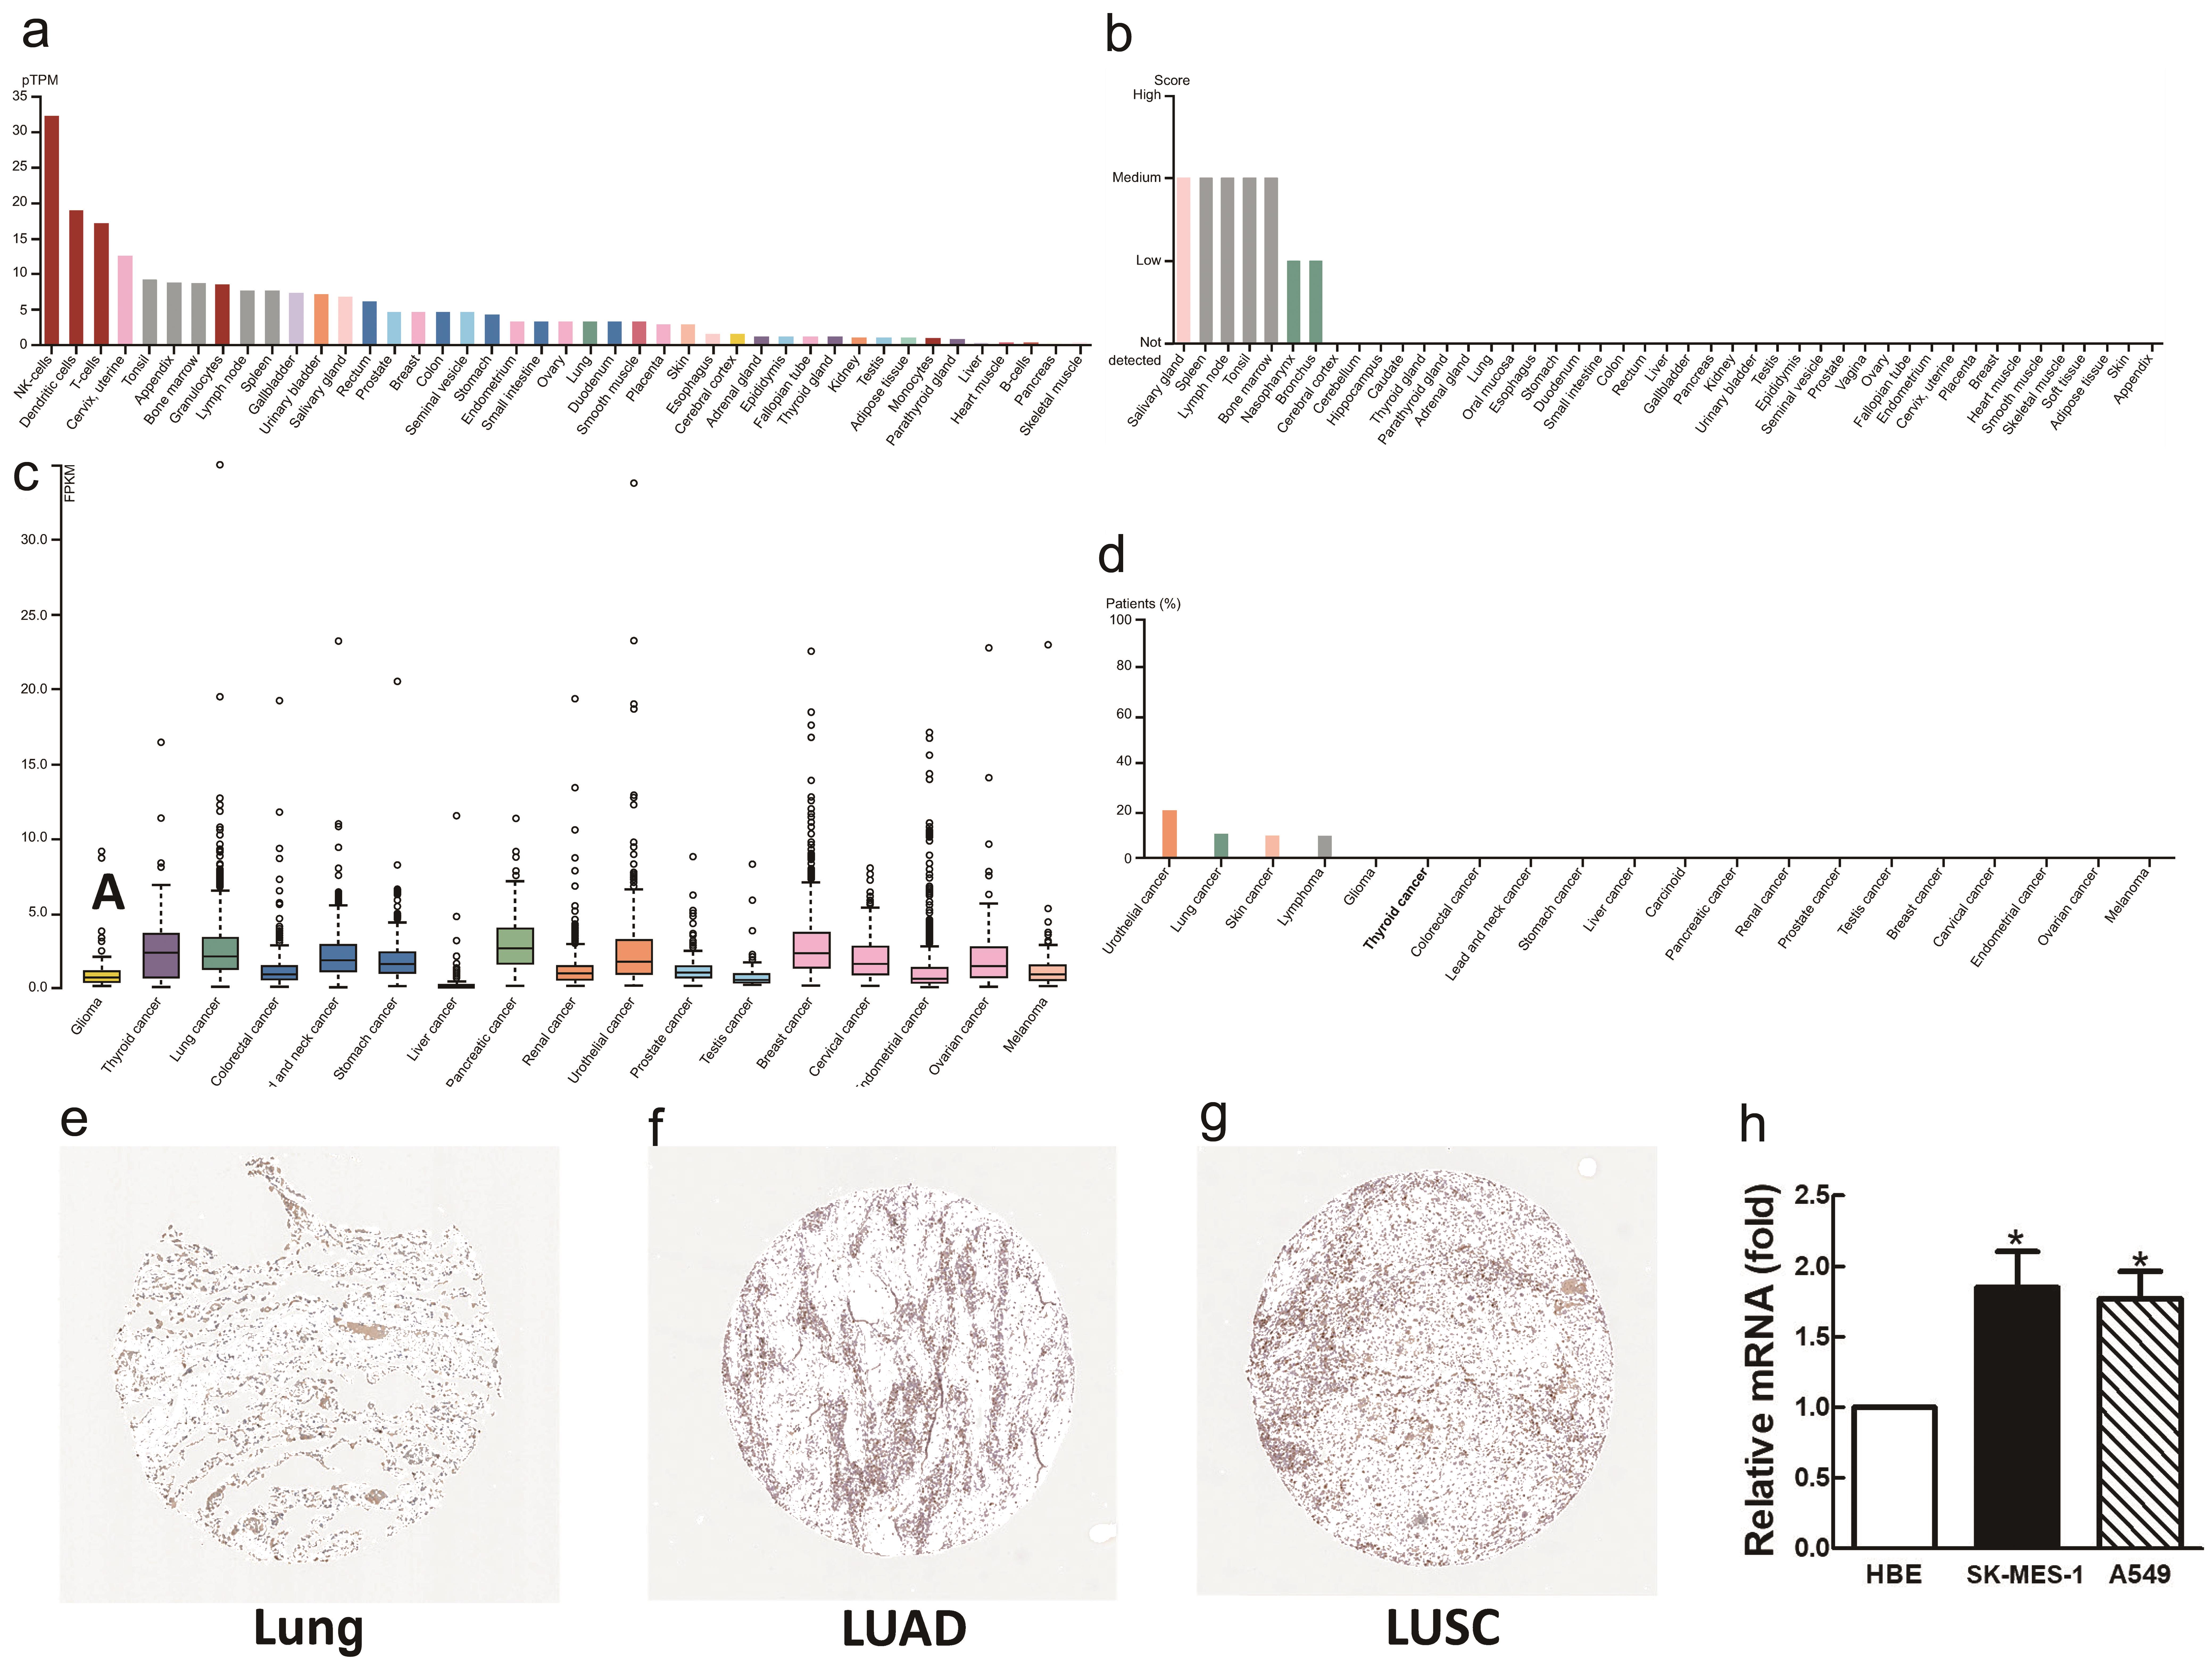 Immunohistochemistry and gene expression of RUNX2 based on the Human Protein Atlas and PT-qPCR experiment.